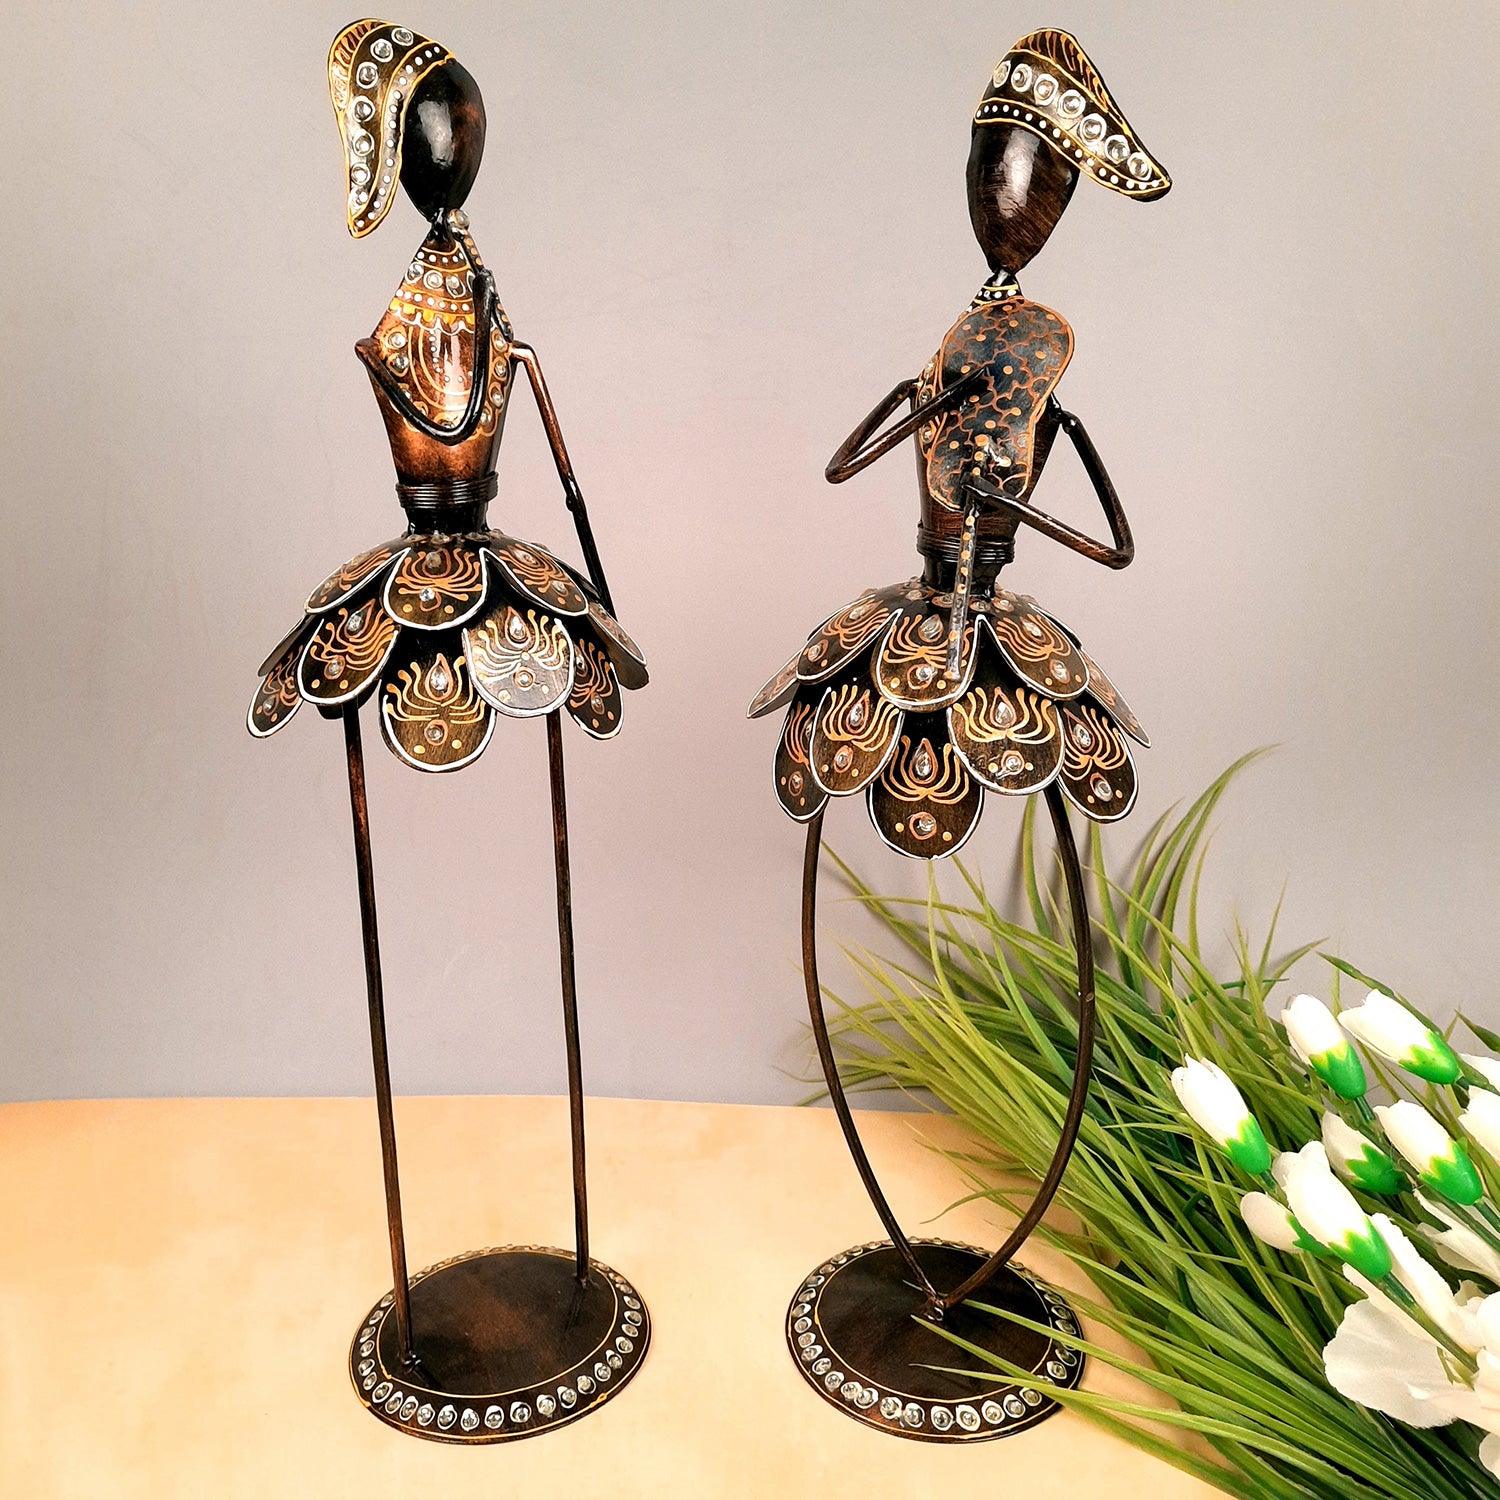 Showpiece Figurine - Muscian Singing & Playing Violin Design | Decorative Long Show pieces With Golden & Kundan Work | Artifacts for Home, Table, Living Room, TV Unit & Bedroom Decor & Gifts- 19 Inch (Set of 2) - Apkamart